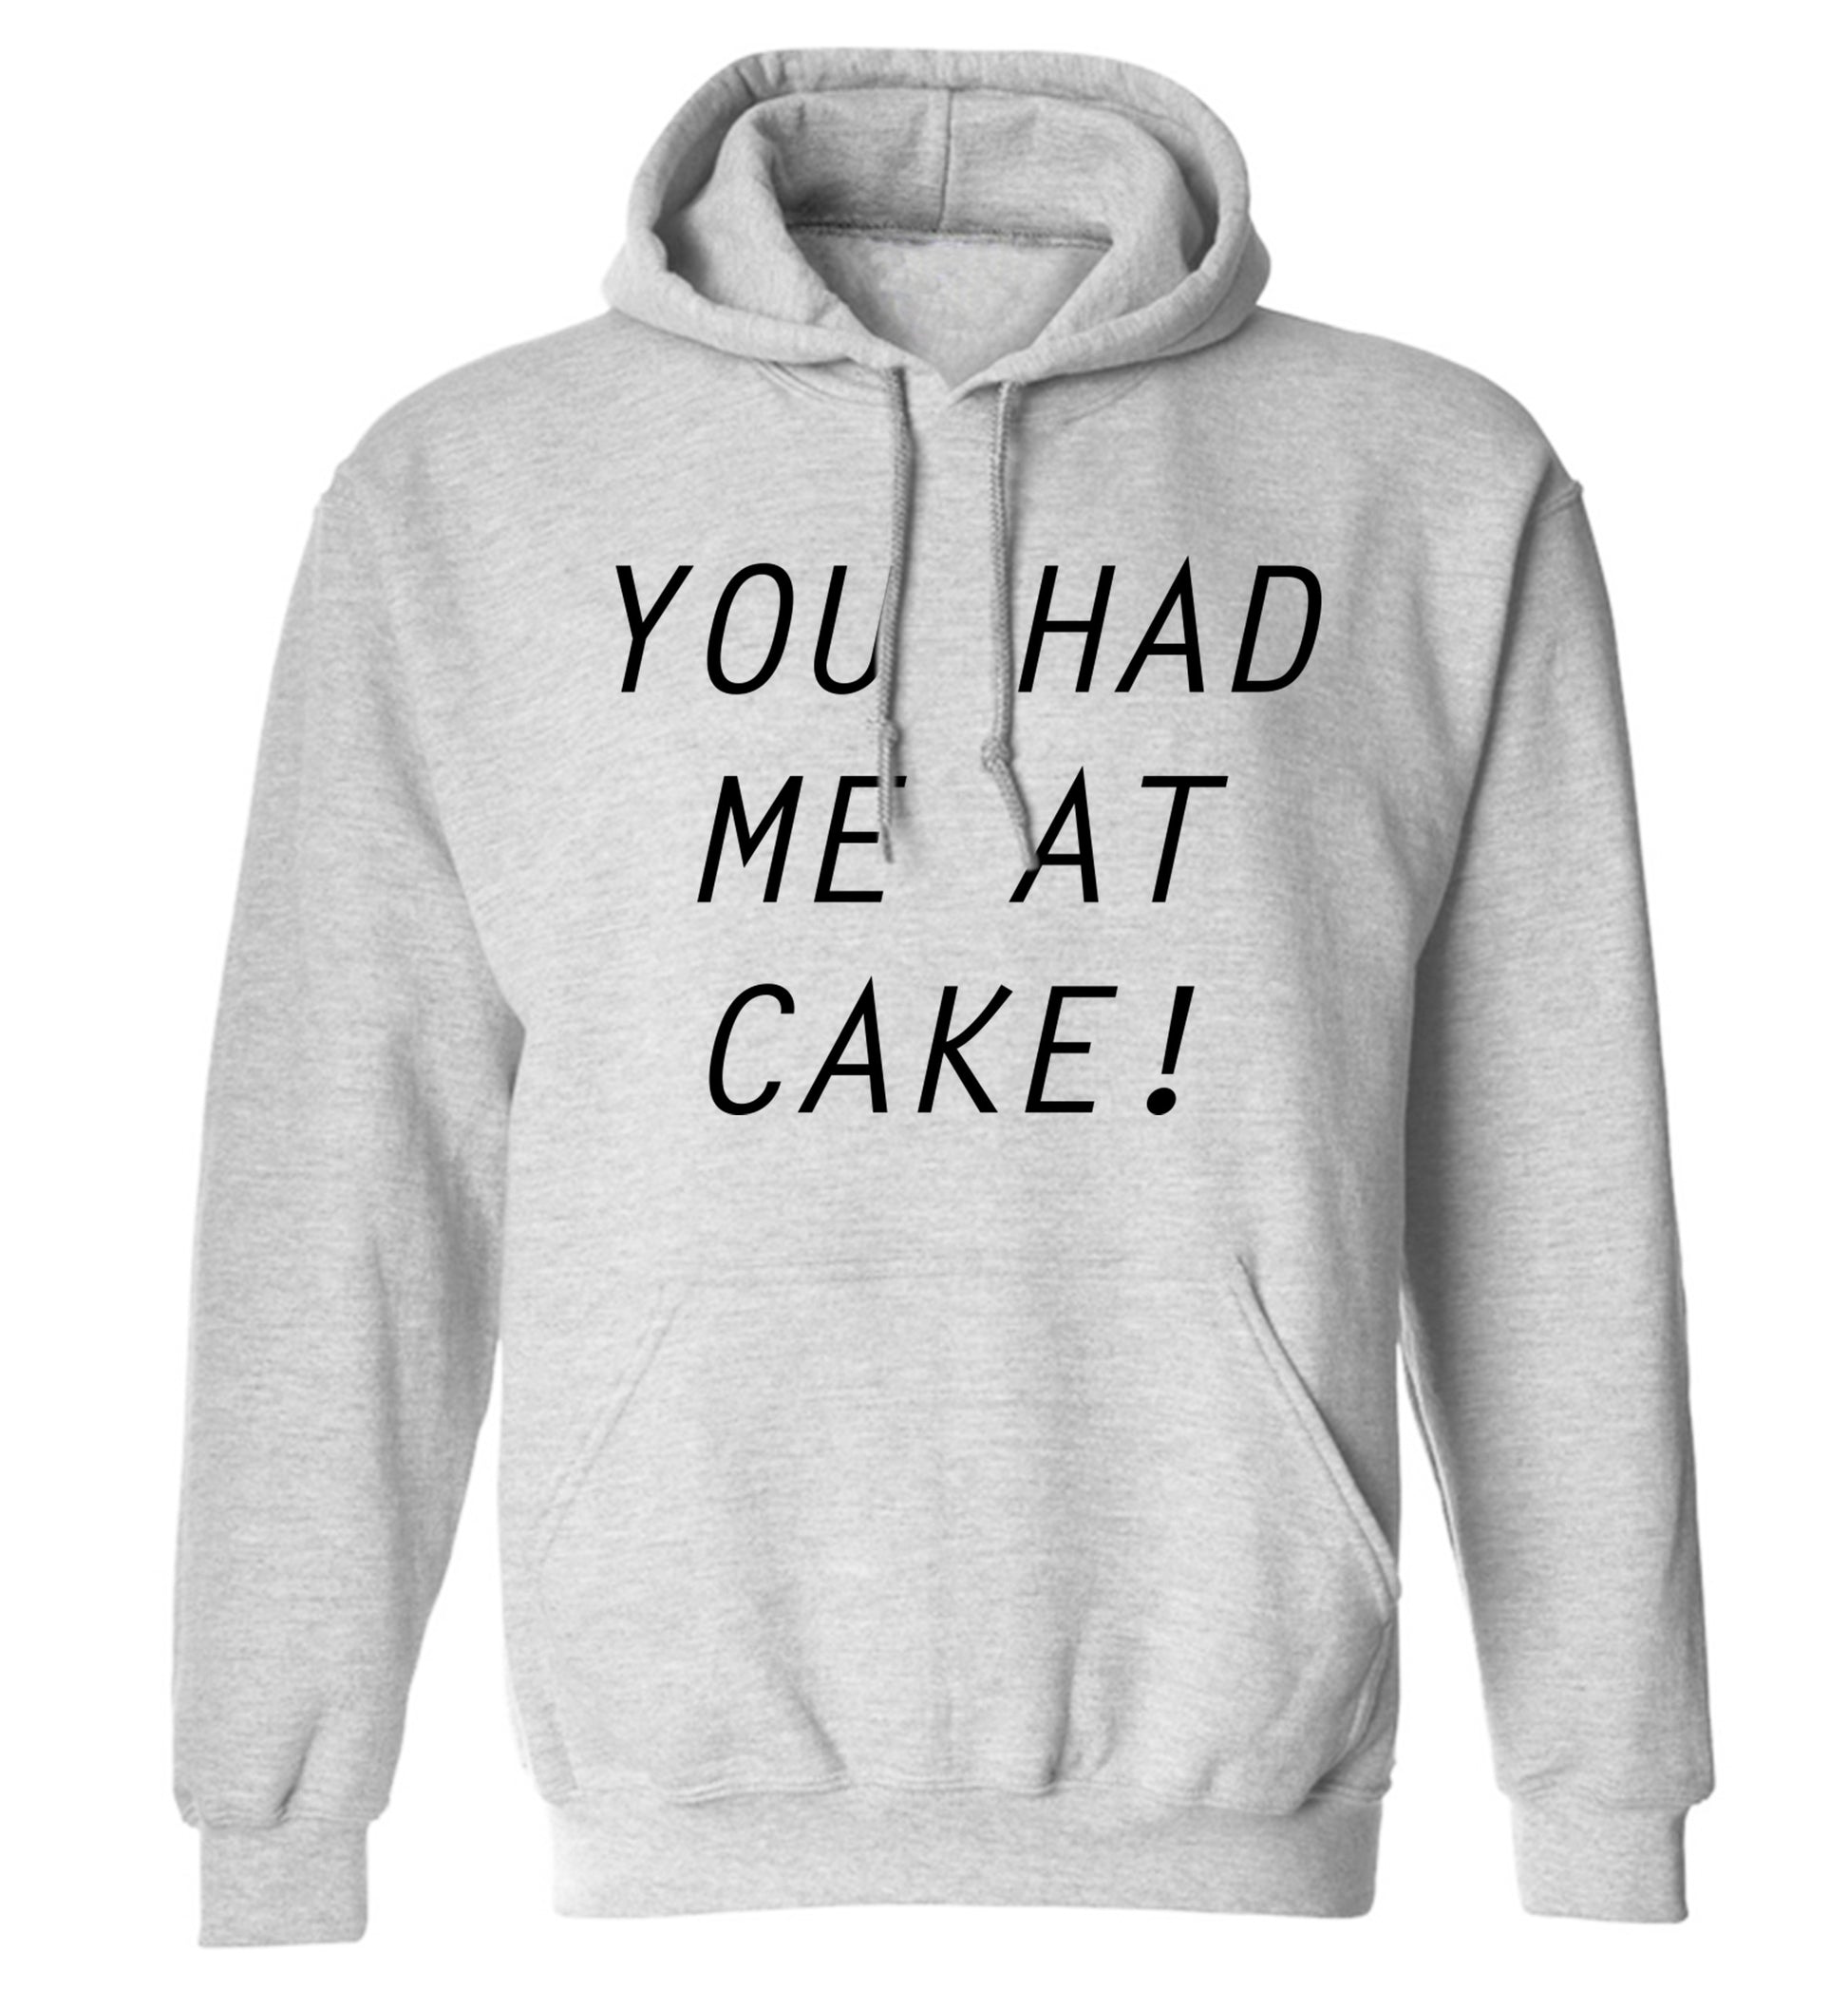 You had me at cake adults unisex grey hoodie 2XL